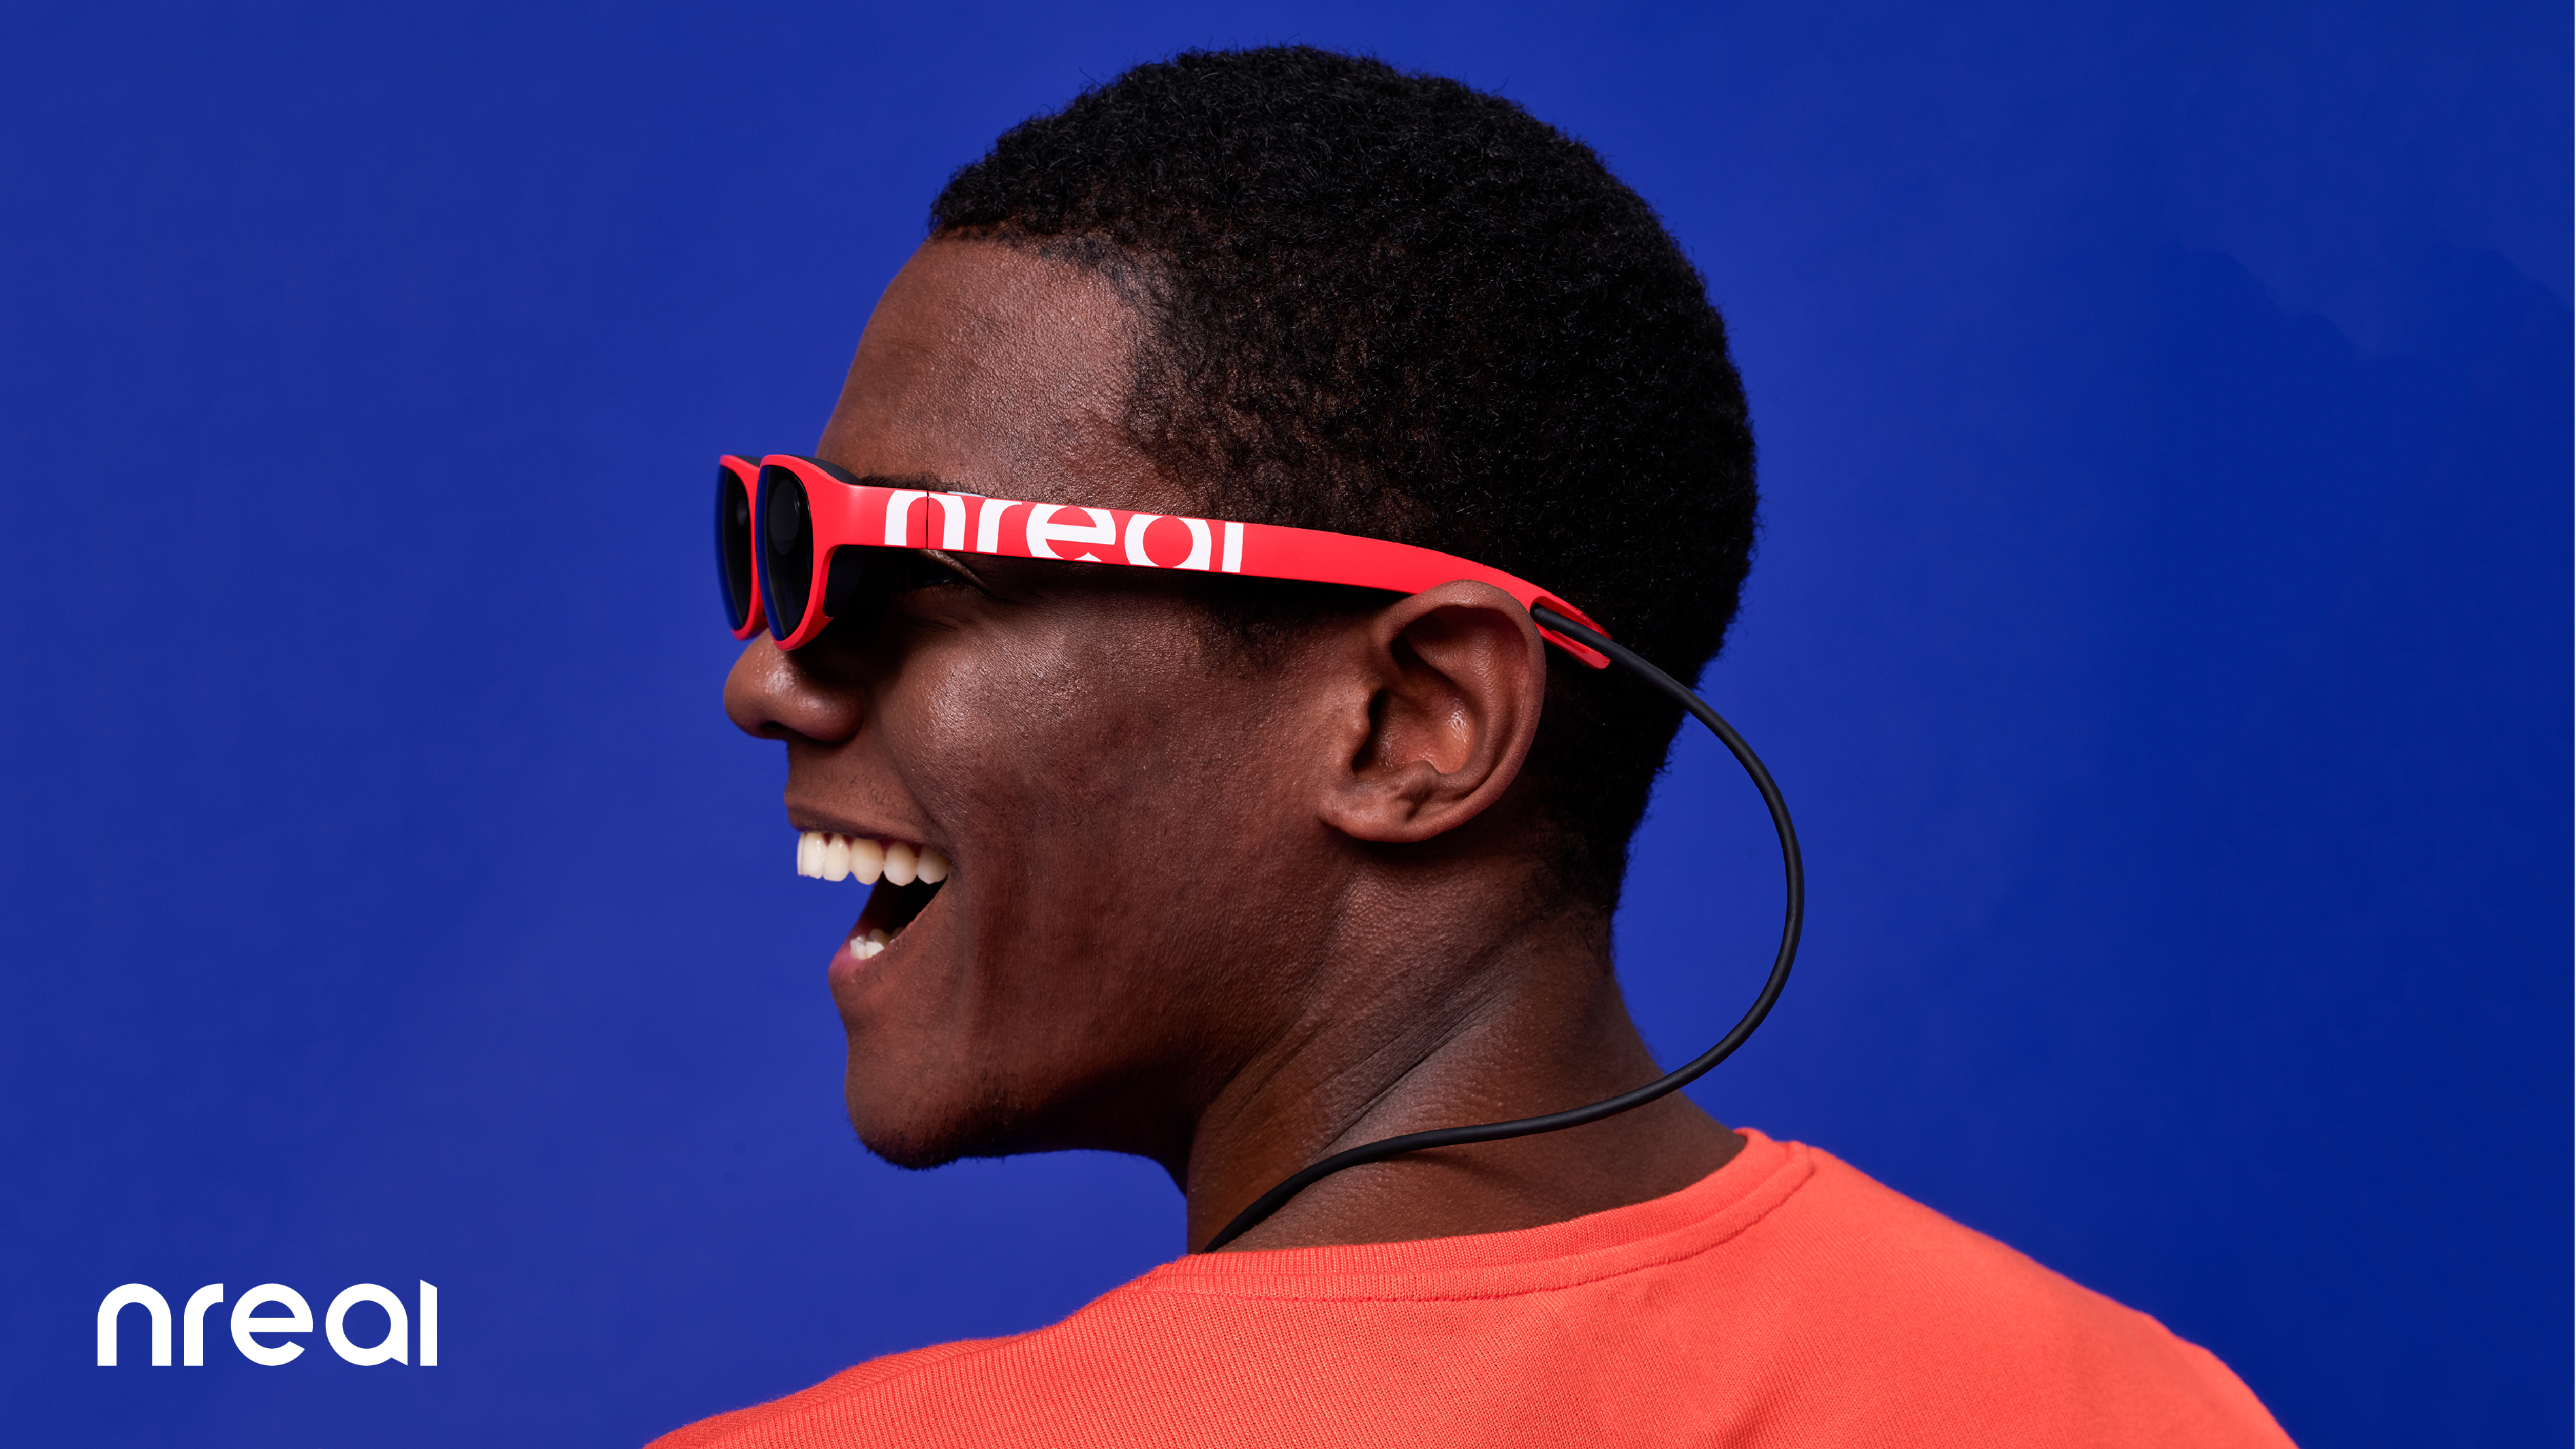 Nreal Air sunglasses let you watch TV in AR | Ars Technica